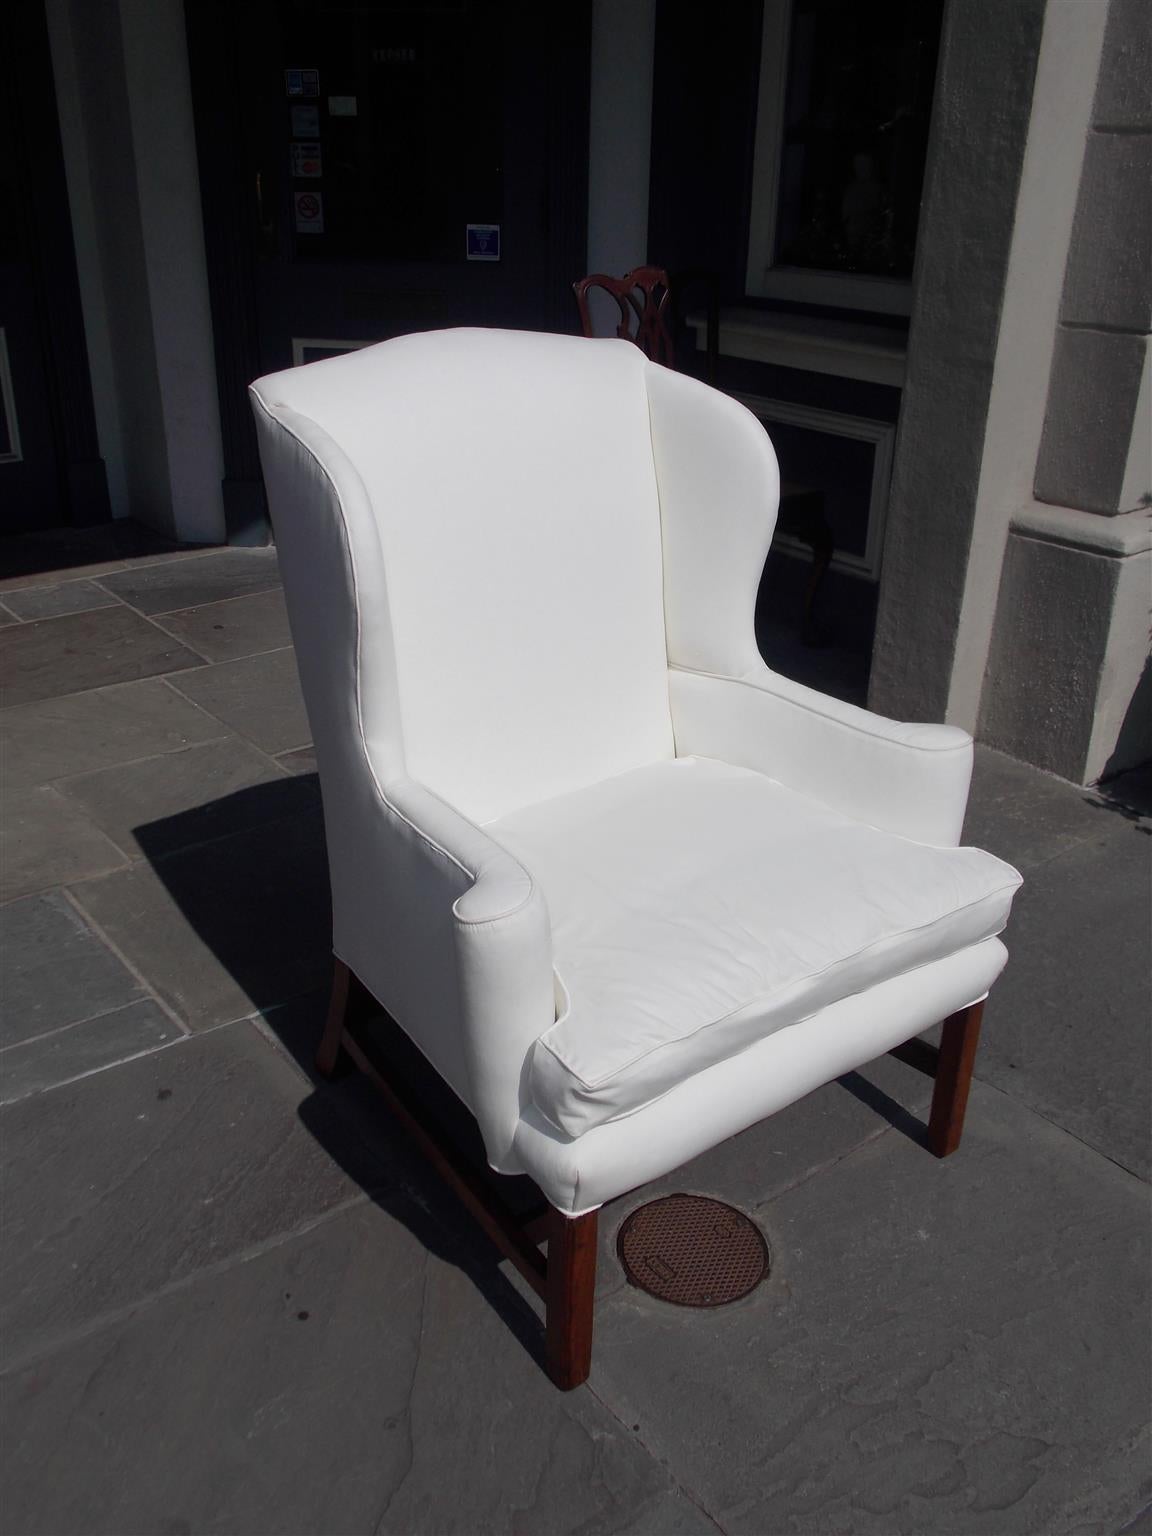 English Chippendale walnut wing back chair with a straight back, scrolled arms, and terminating on reeded blocked legs with cross stretchers, Late 18th century. Chair is upholstered in white muslin.